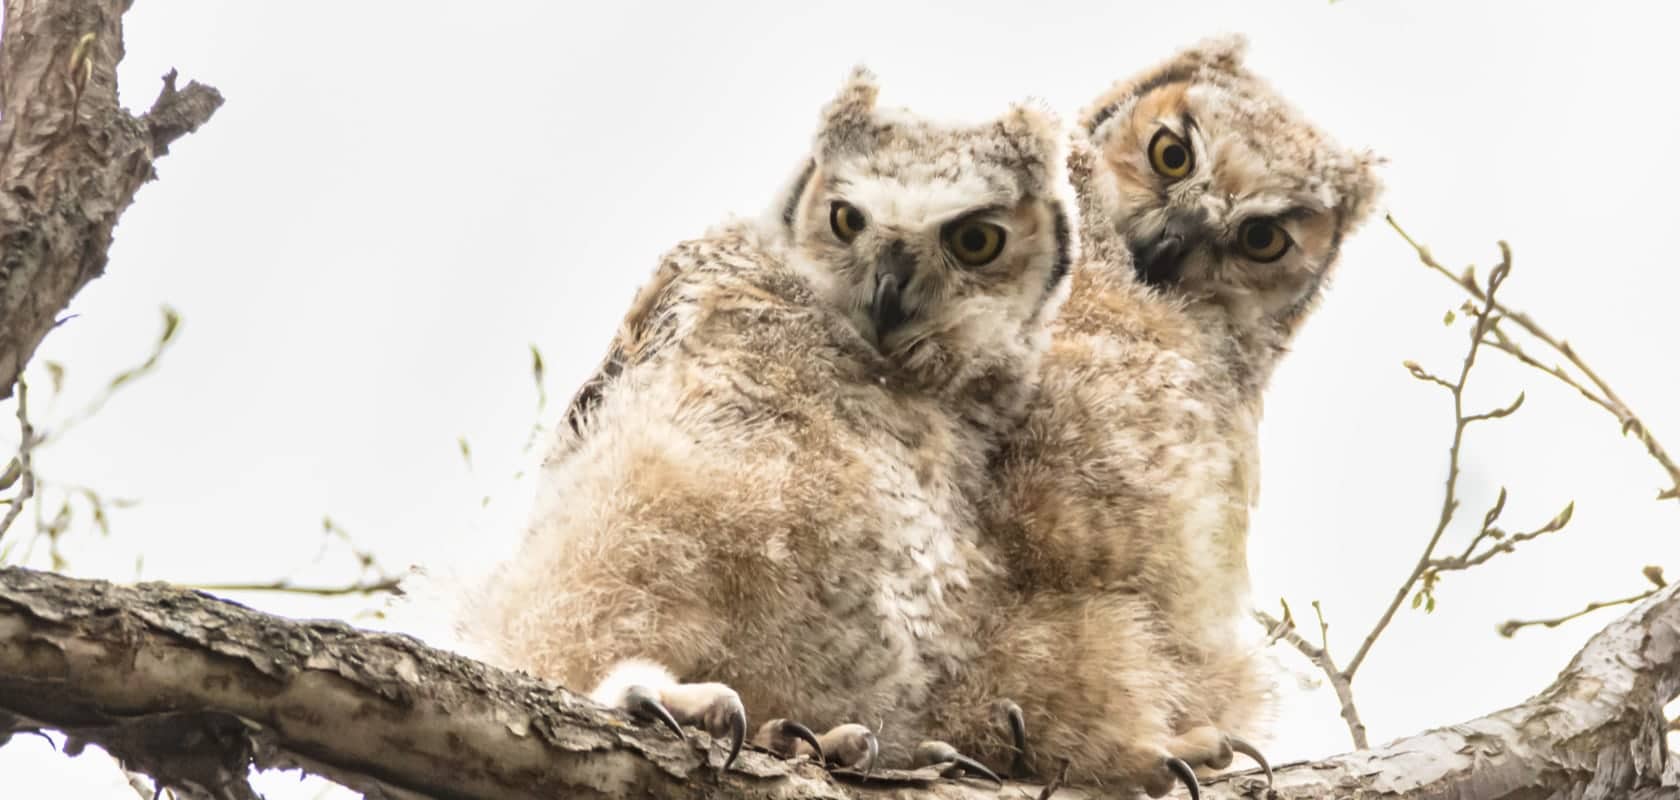 Two owlets perched on tree branch